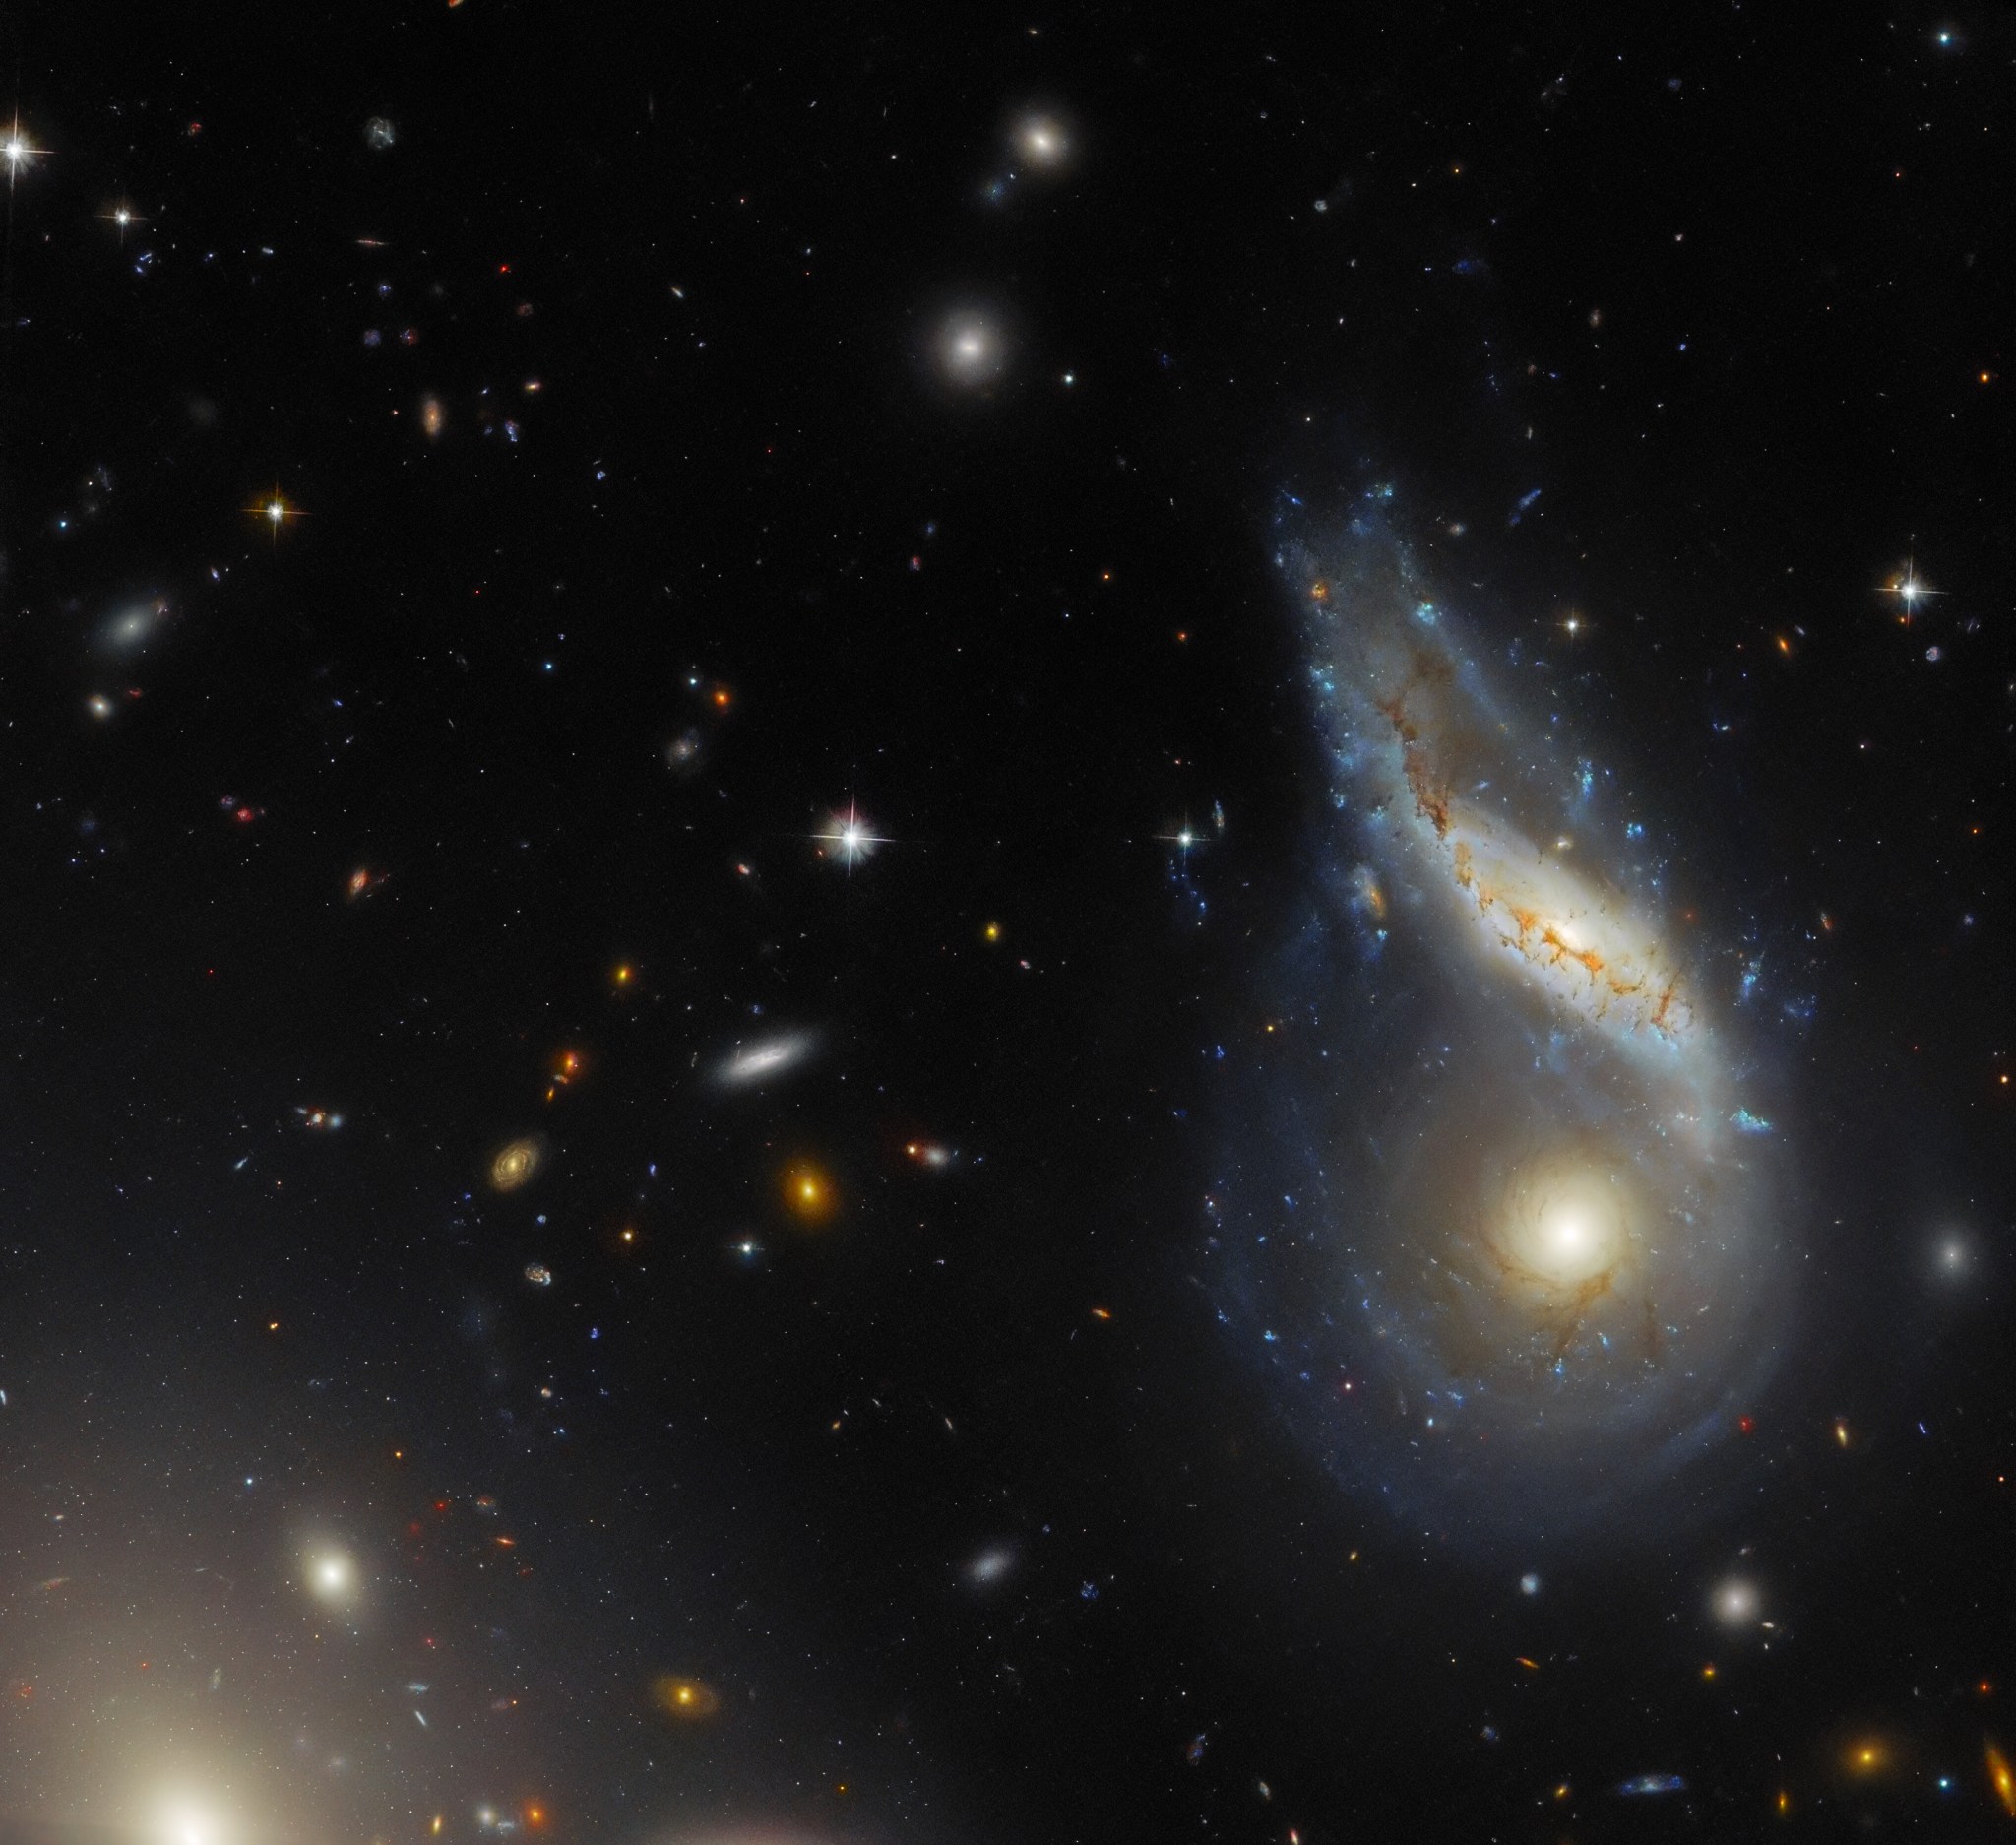 Two galaxies form a teardrop, paisley-like shape at right as they collide. Other galaxies dot the darkness of space.